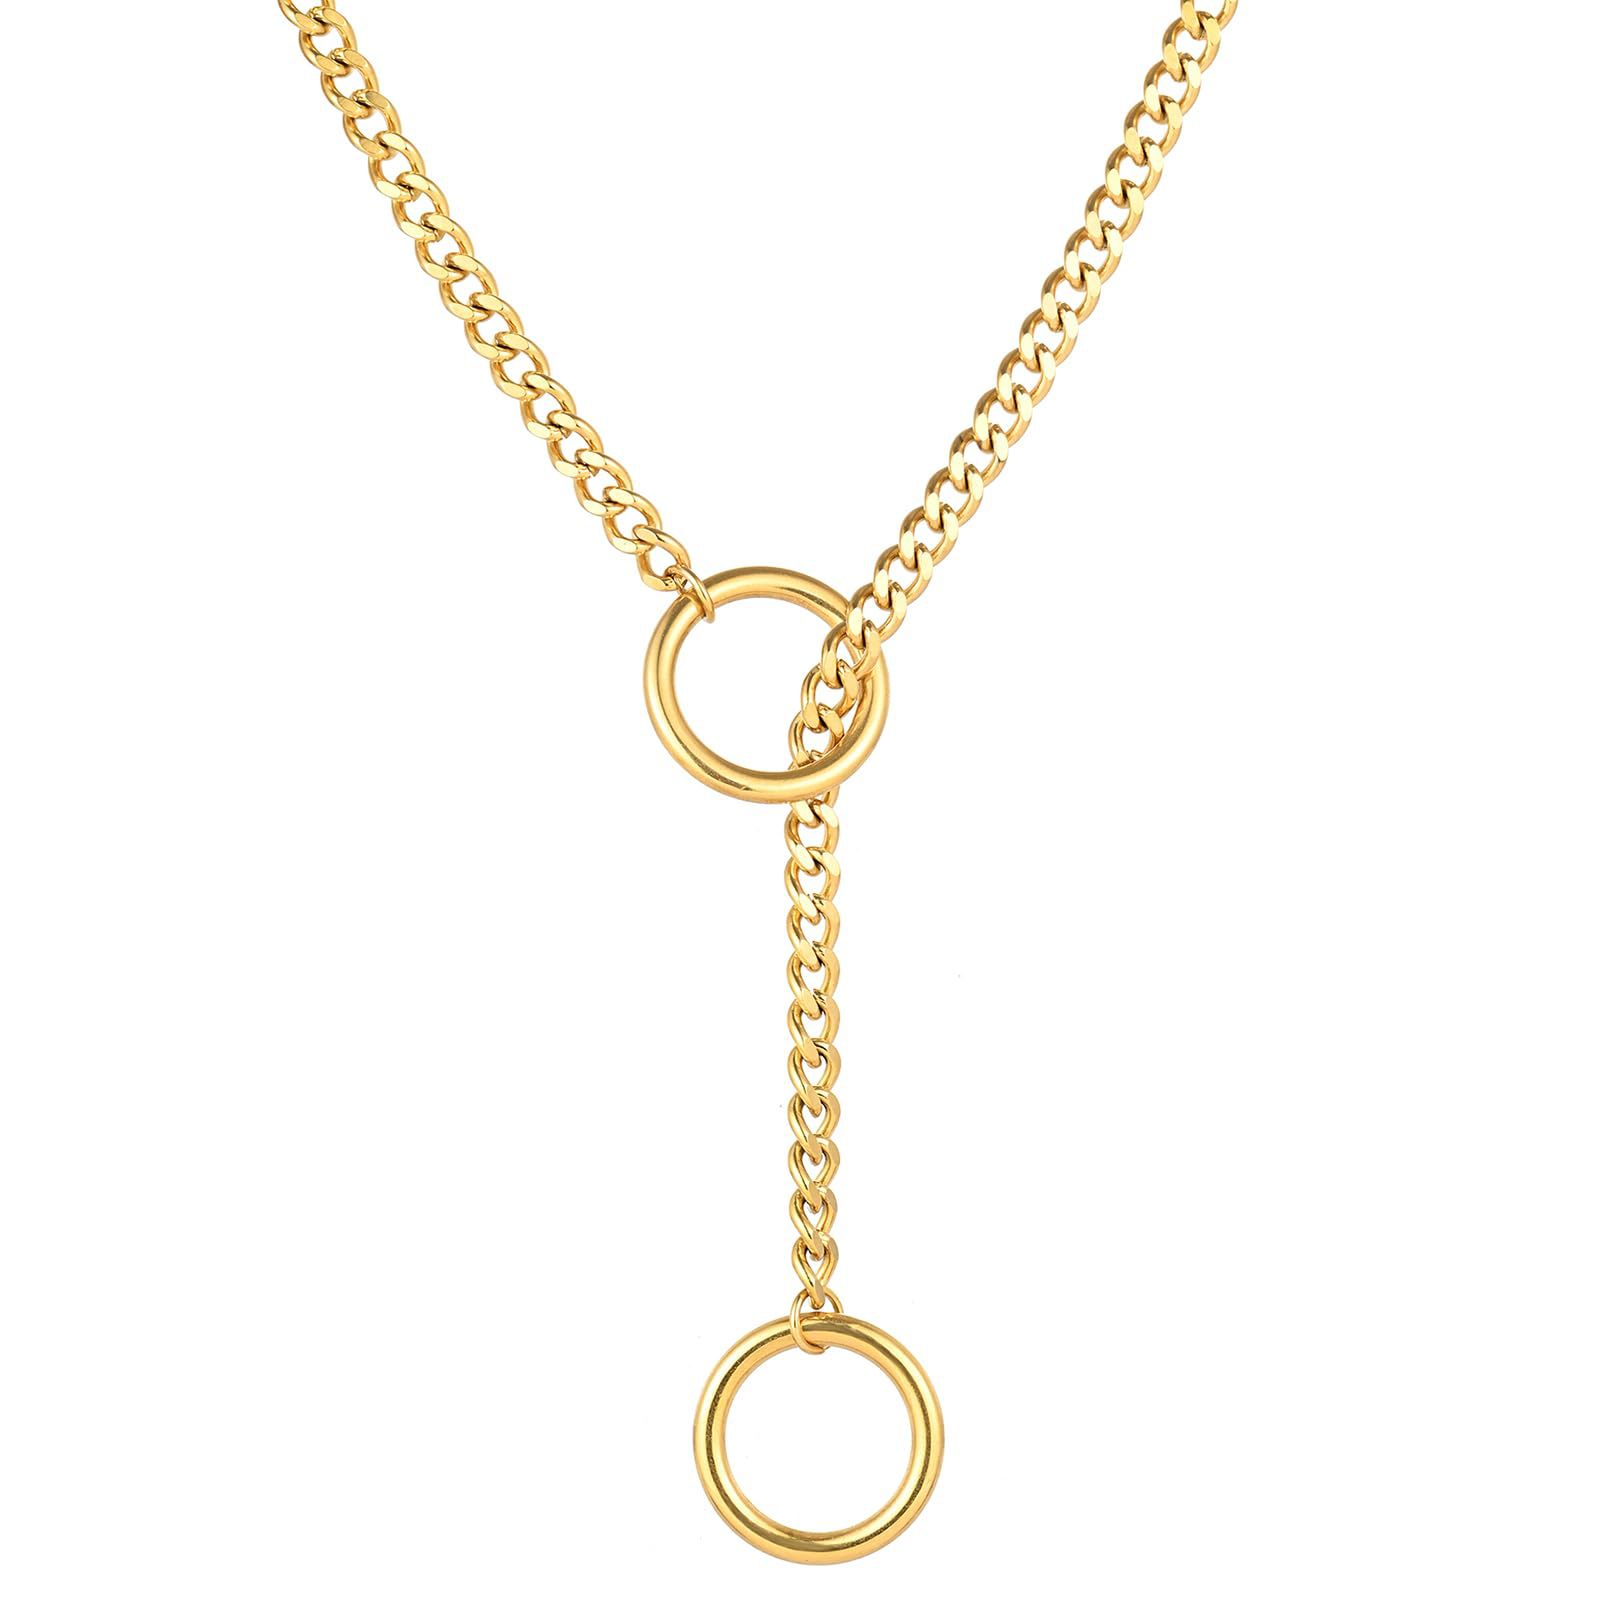 Golden Ring Necklace